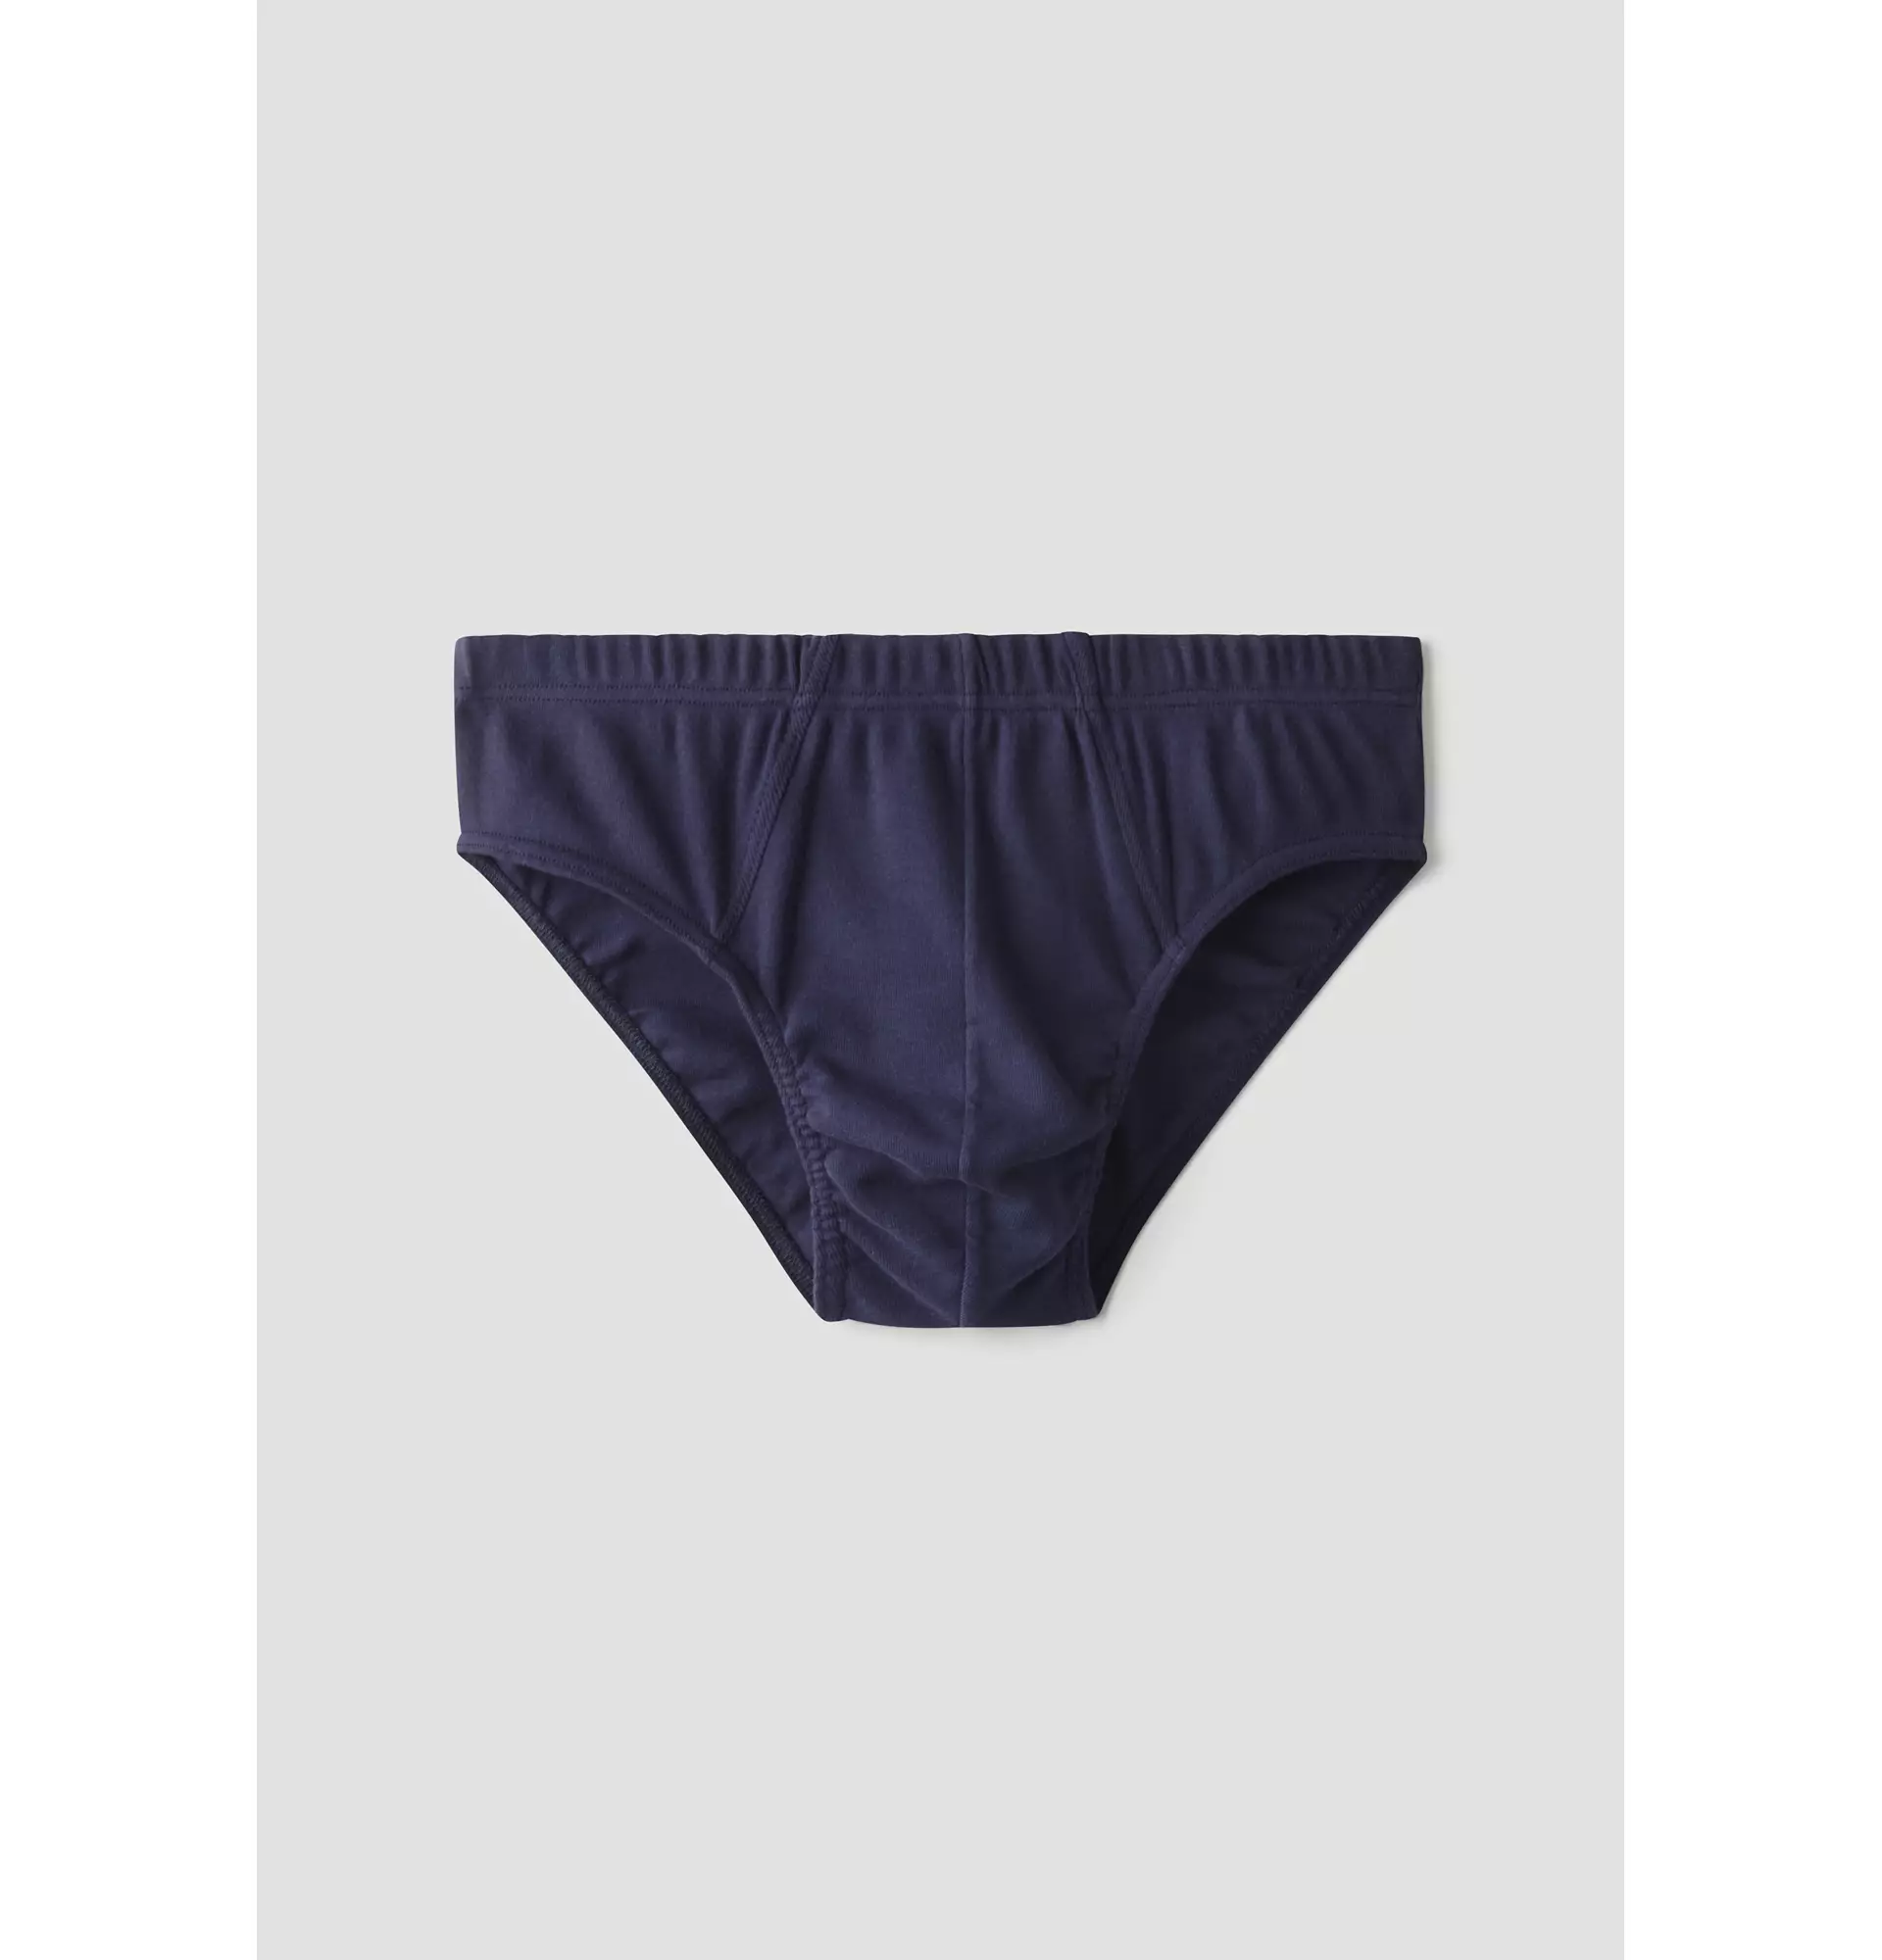 Organic Cotton Underwear - Made With All Natural Fibers! – Page 2